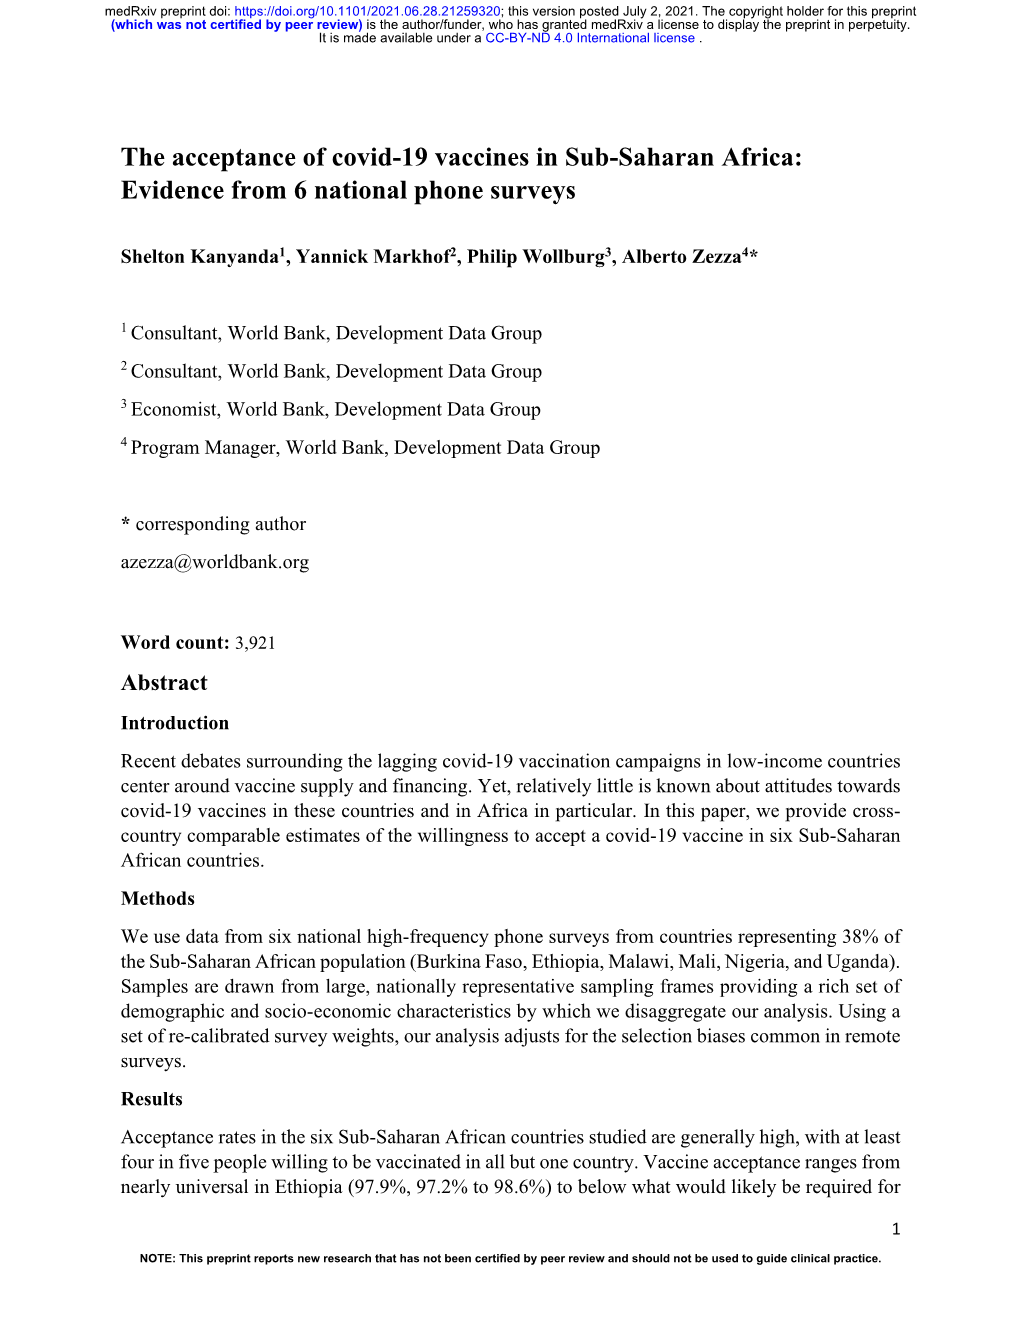 The Acceptance of Covid-19 Vaccines in Sub-Saharan Africa: Evidence from 6 National Phone Surveys